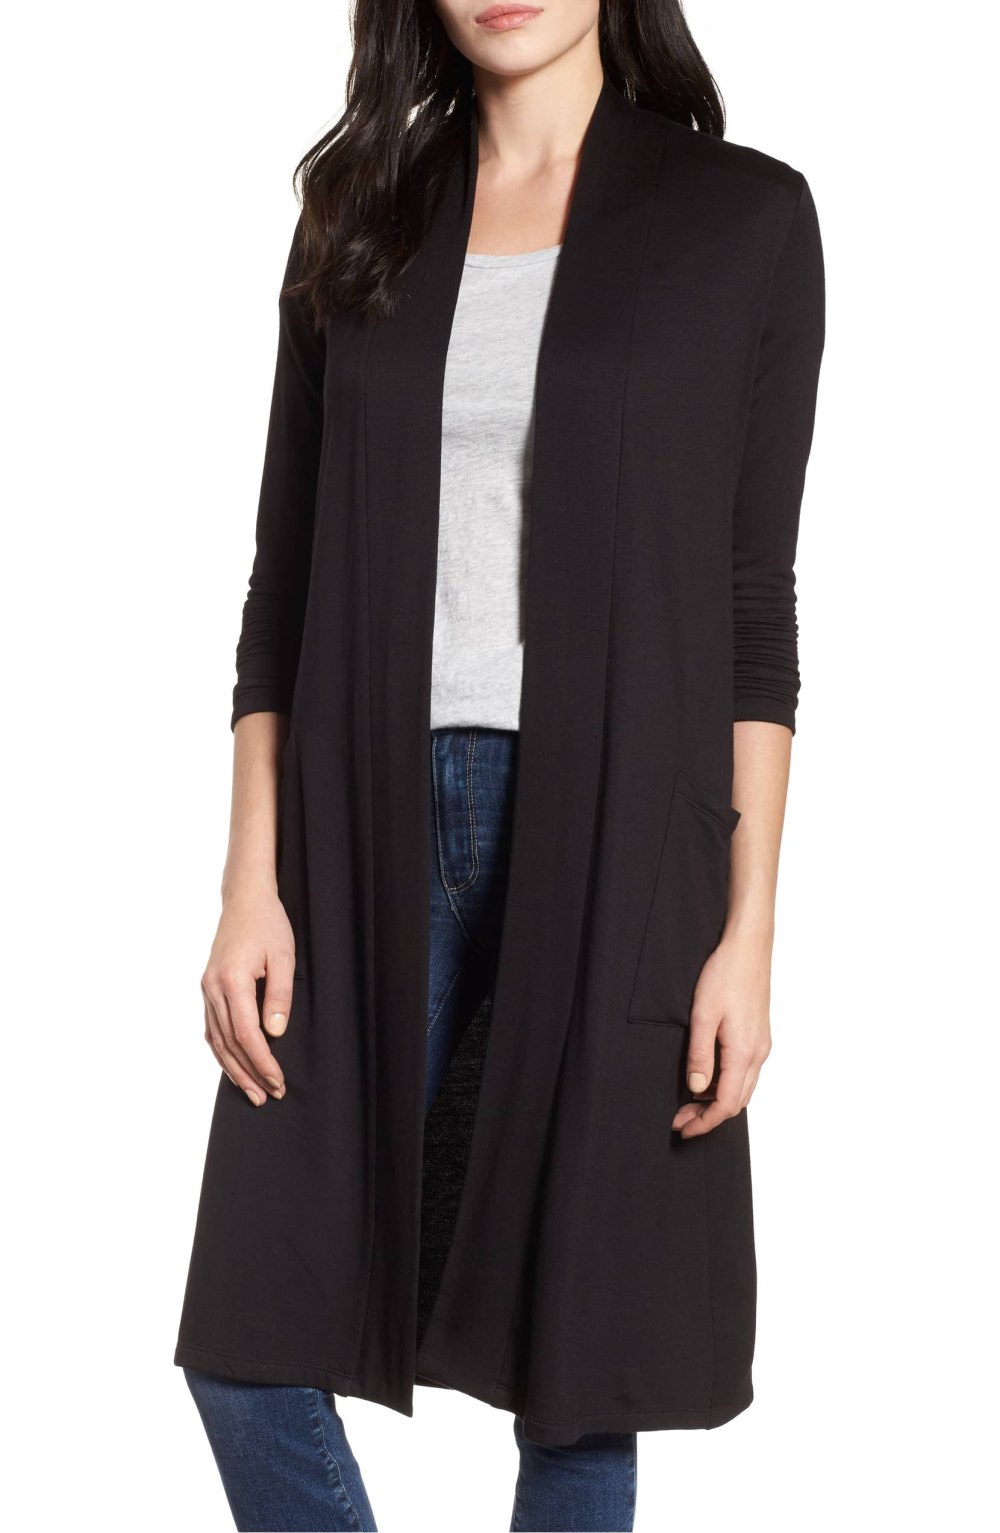 Shop This Fleece Cardigan to Stay Warm in Your Cold Office | Us Weekly